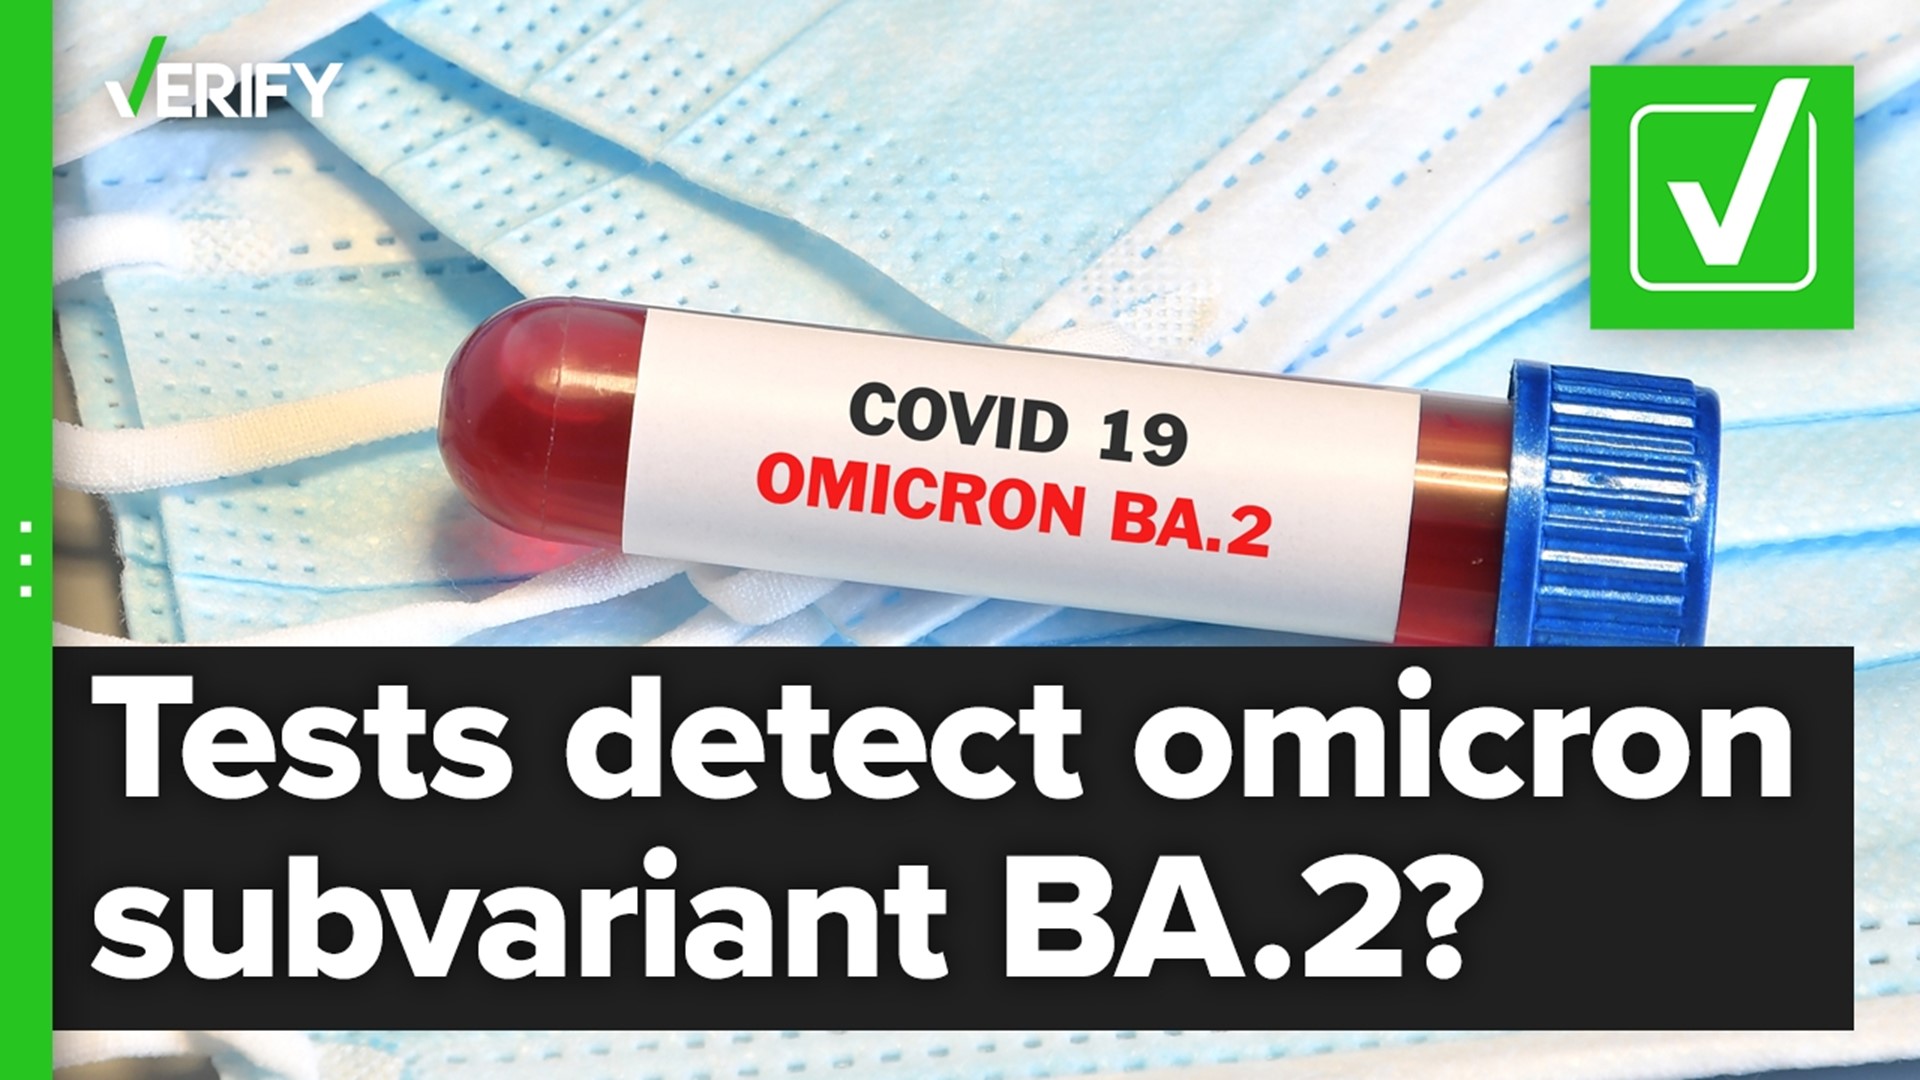 Experts say “stealth” omicron is an inaccurate name for BA.2 since the subvariant doesn’t evade COVID-19 testing, as some have claimed.